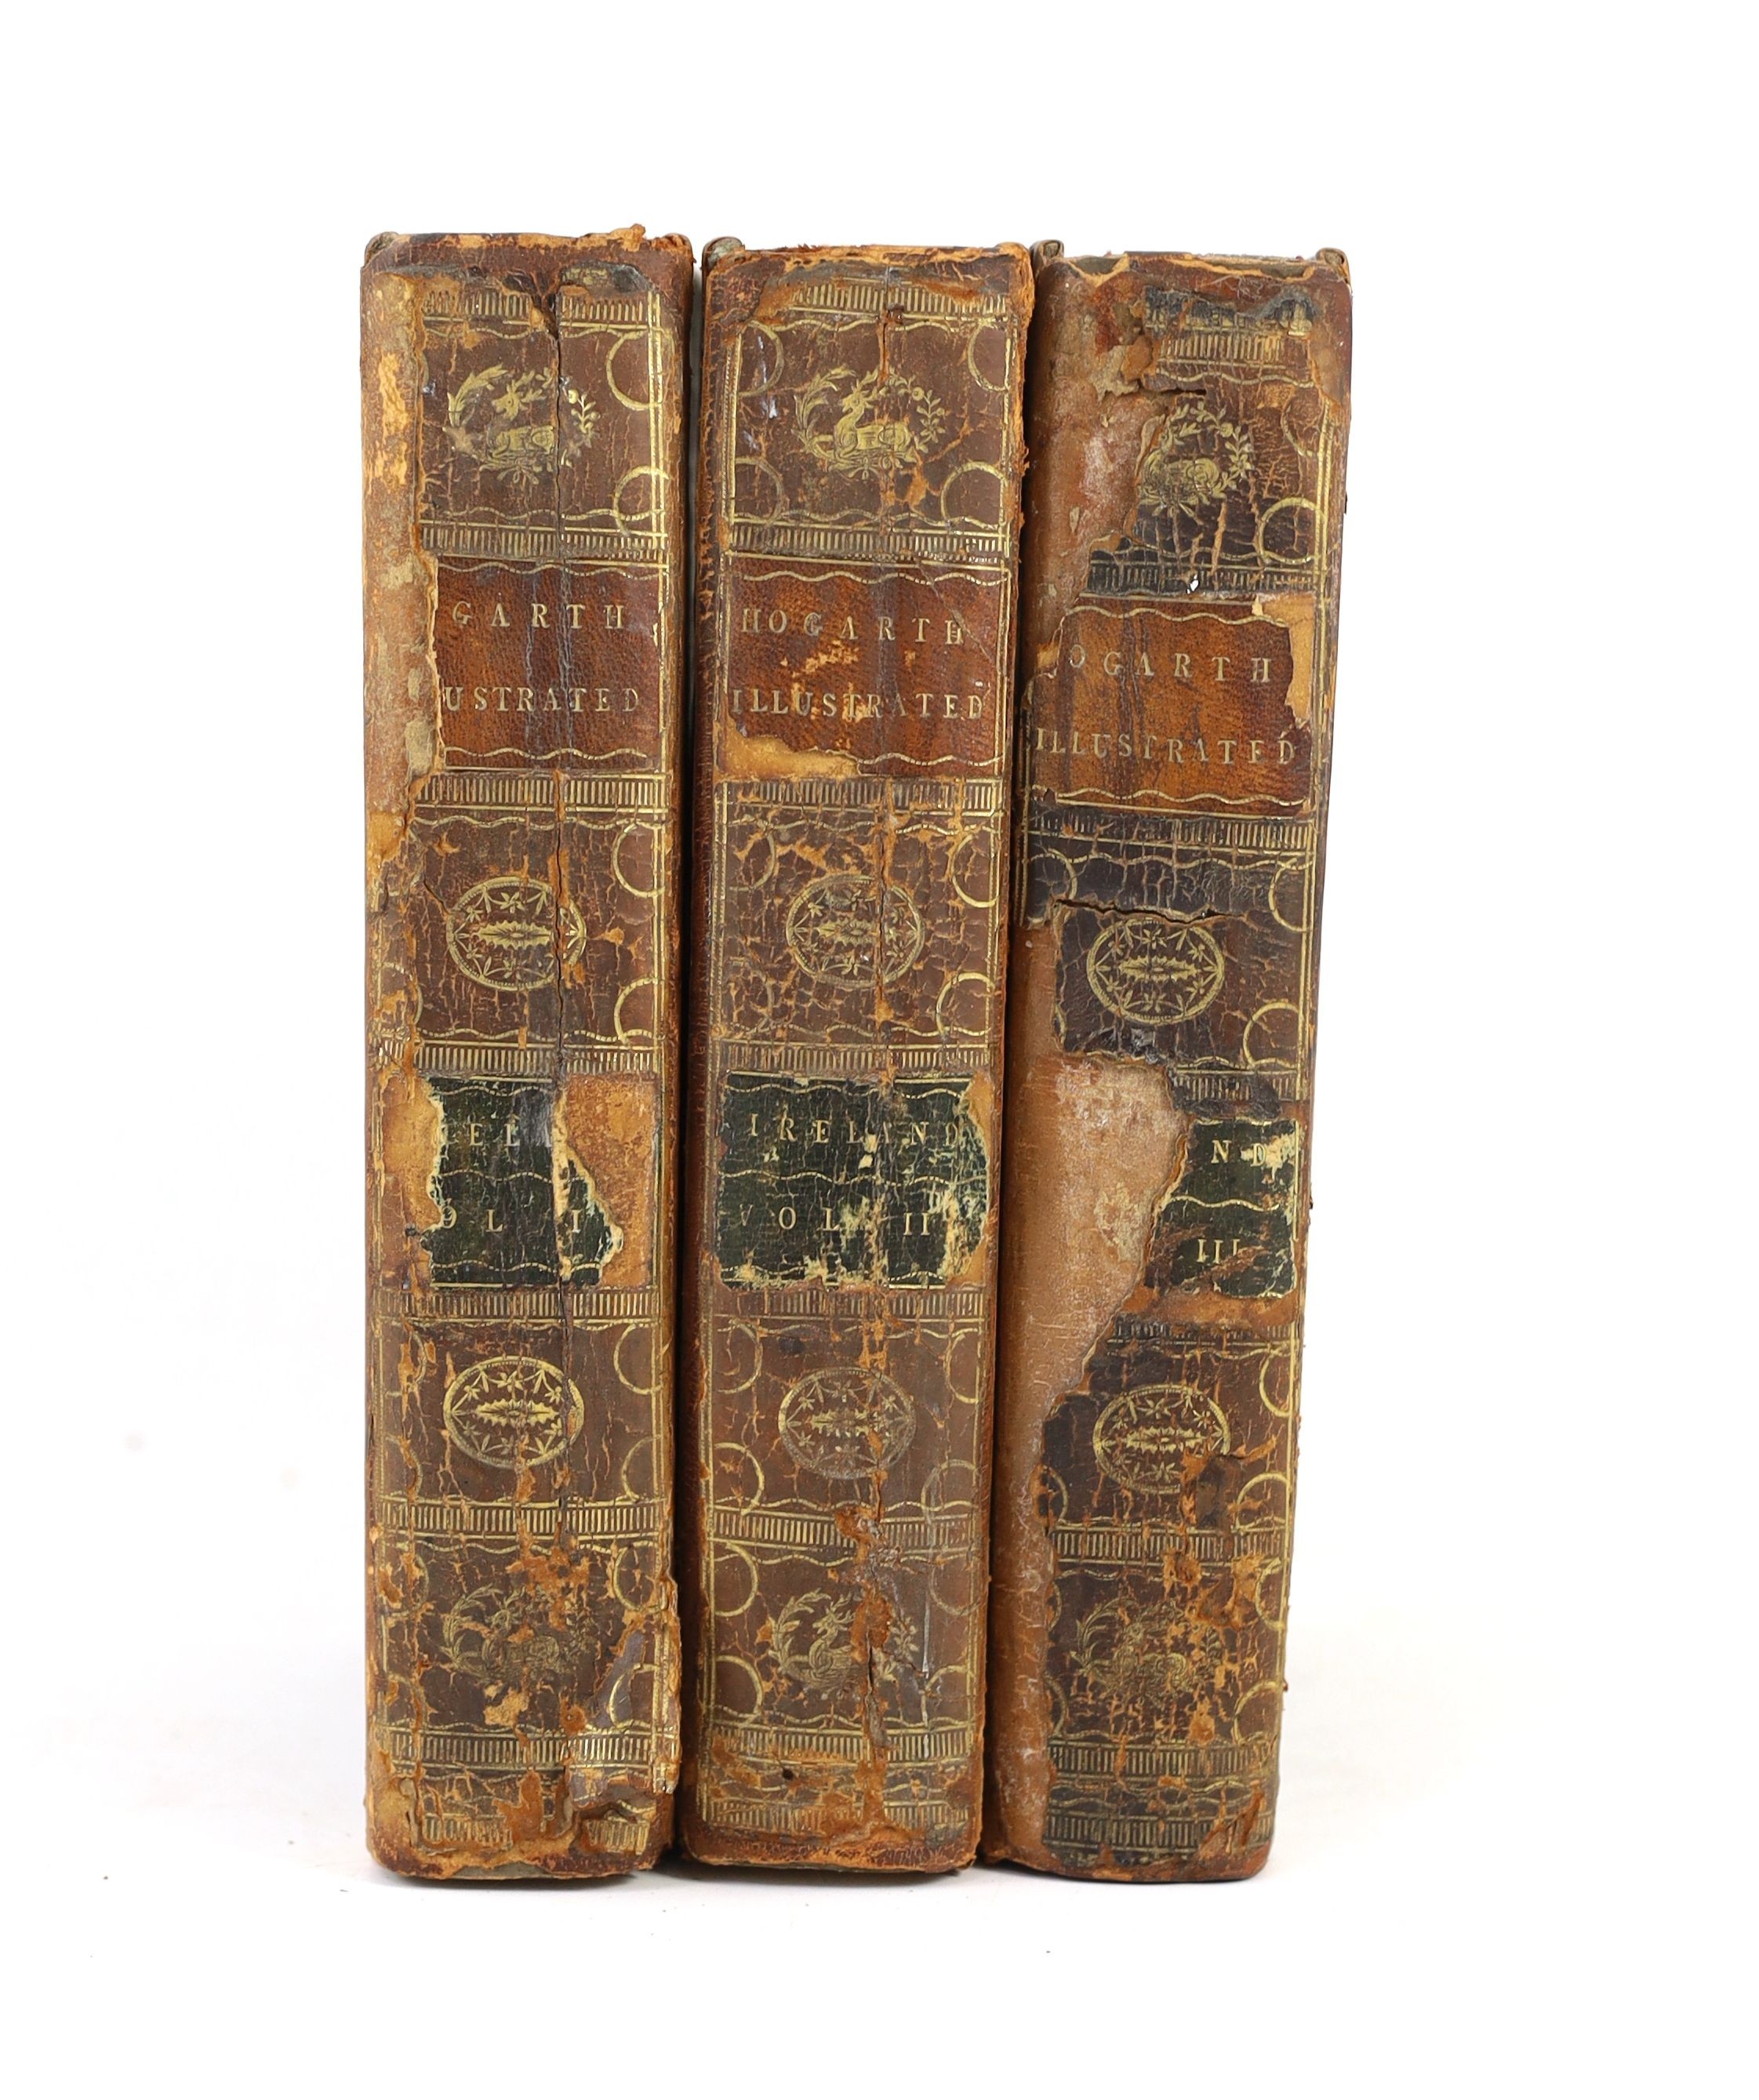 Ireland, John - Hogarth Illustrated, 1st edition, 3 vols, 8vo, calf, with 3 portraits, 3 engraved titles and 122 plates, spines and boards chipped and with loss, London, 1791-98